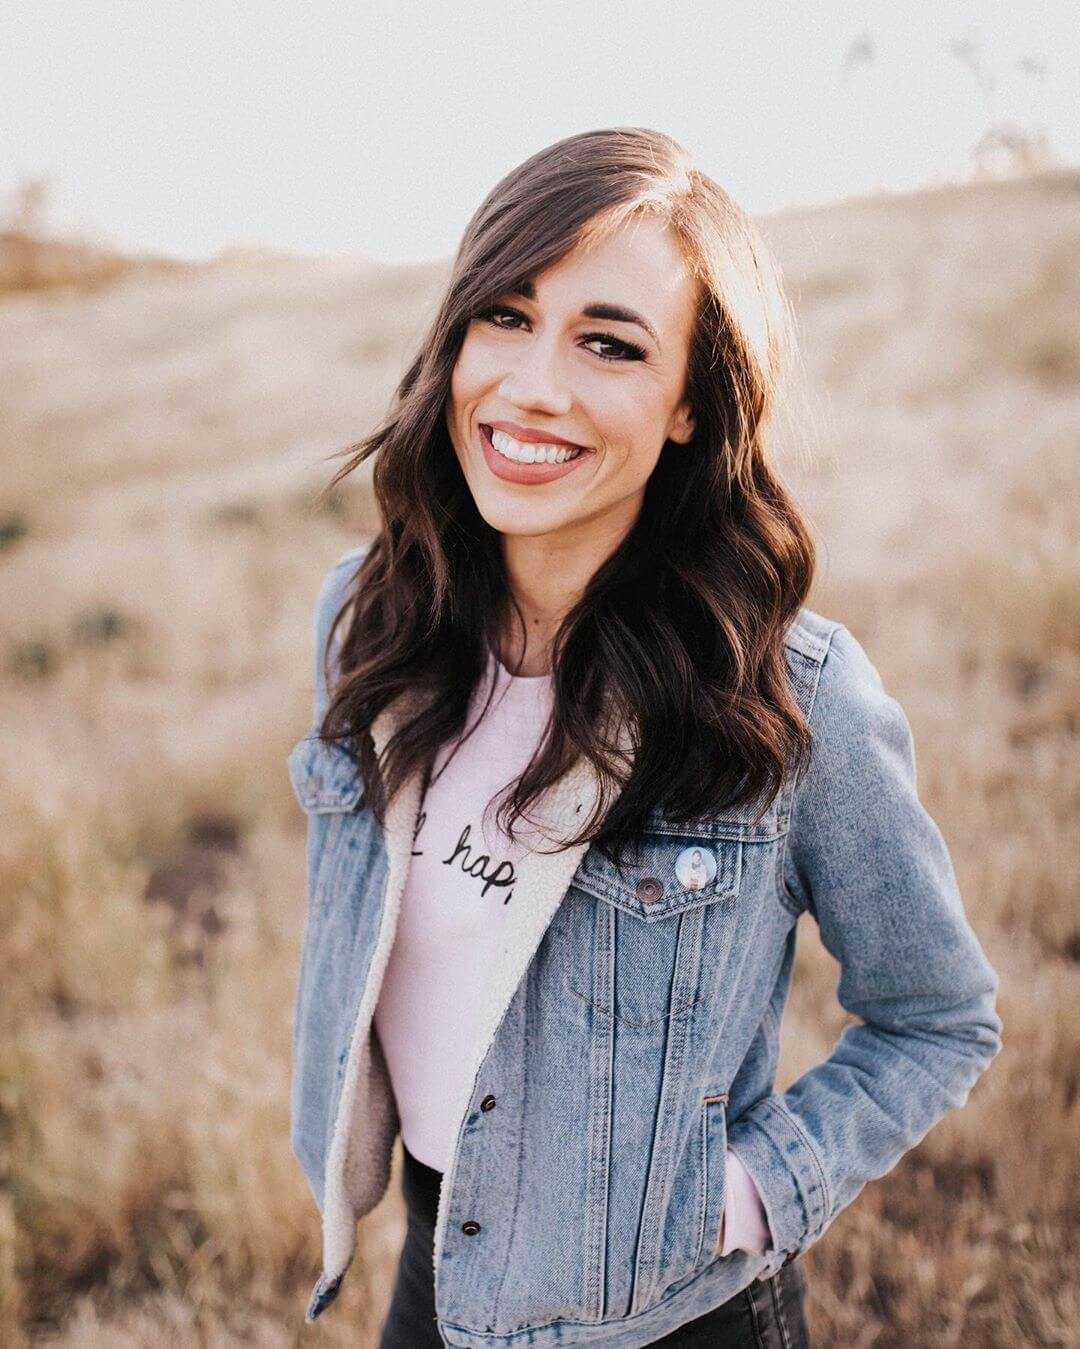 51 Hottest Colleen Ballinger Big Butt Pictures That Will Make You Begin To Look All Starry Eyed At Her 287